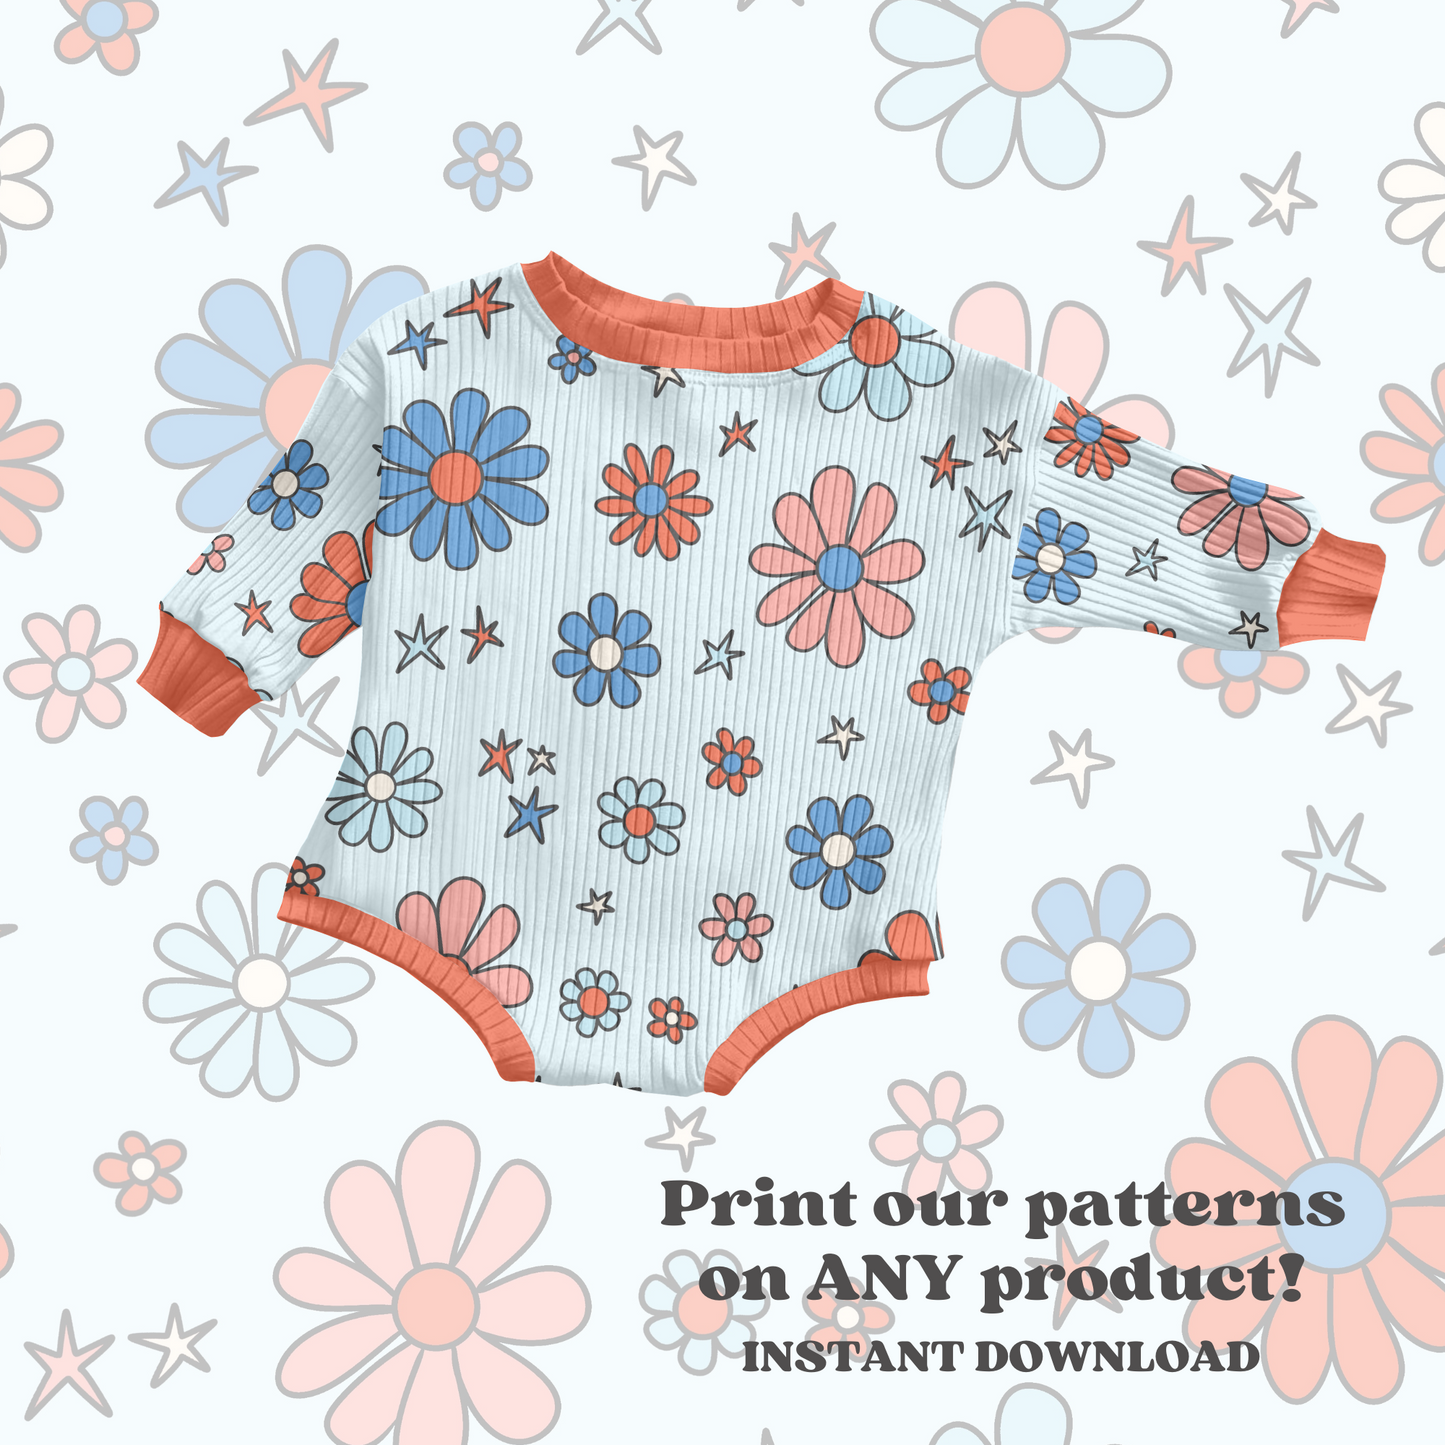 Retro Fourth of July Daisies Pattern